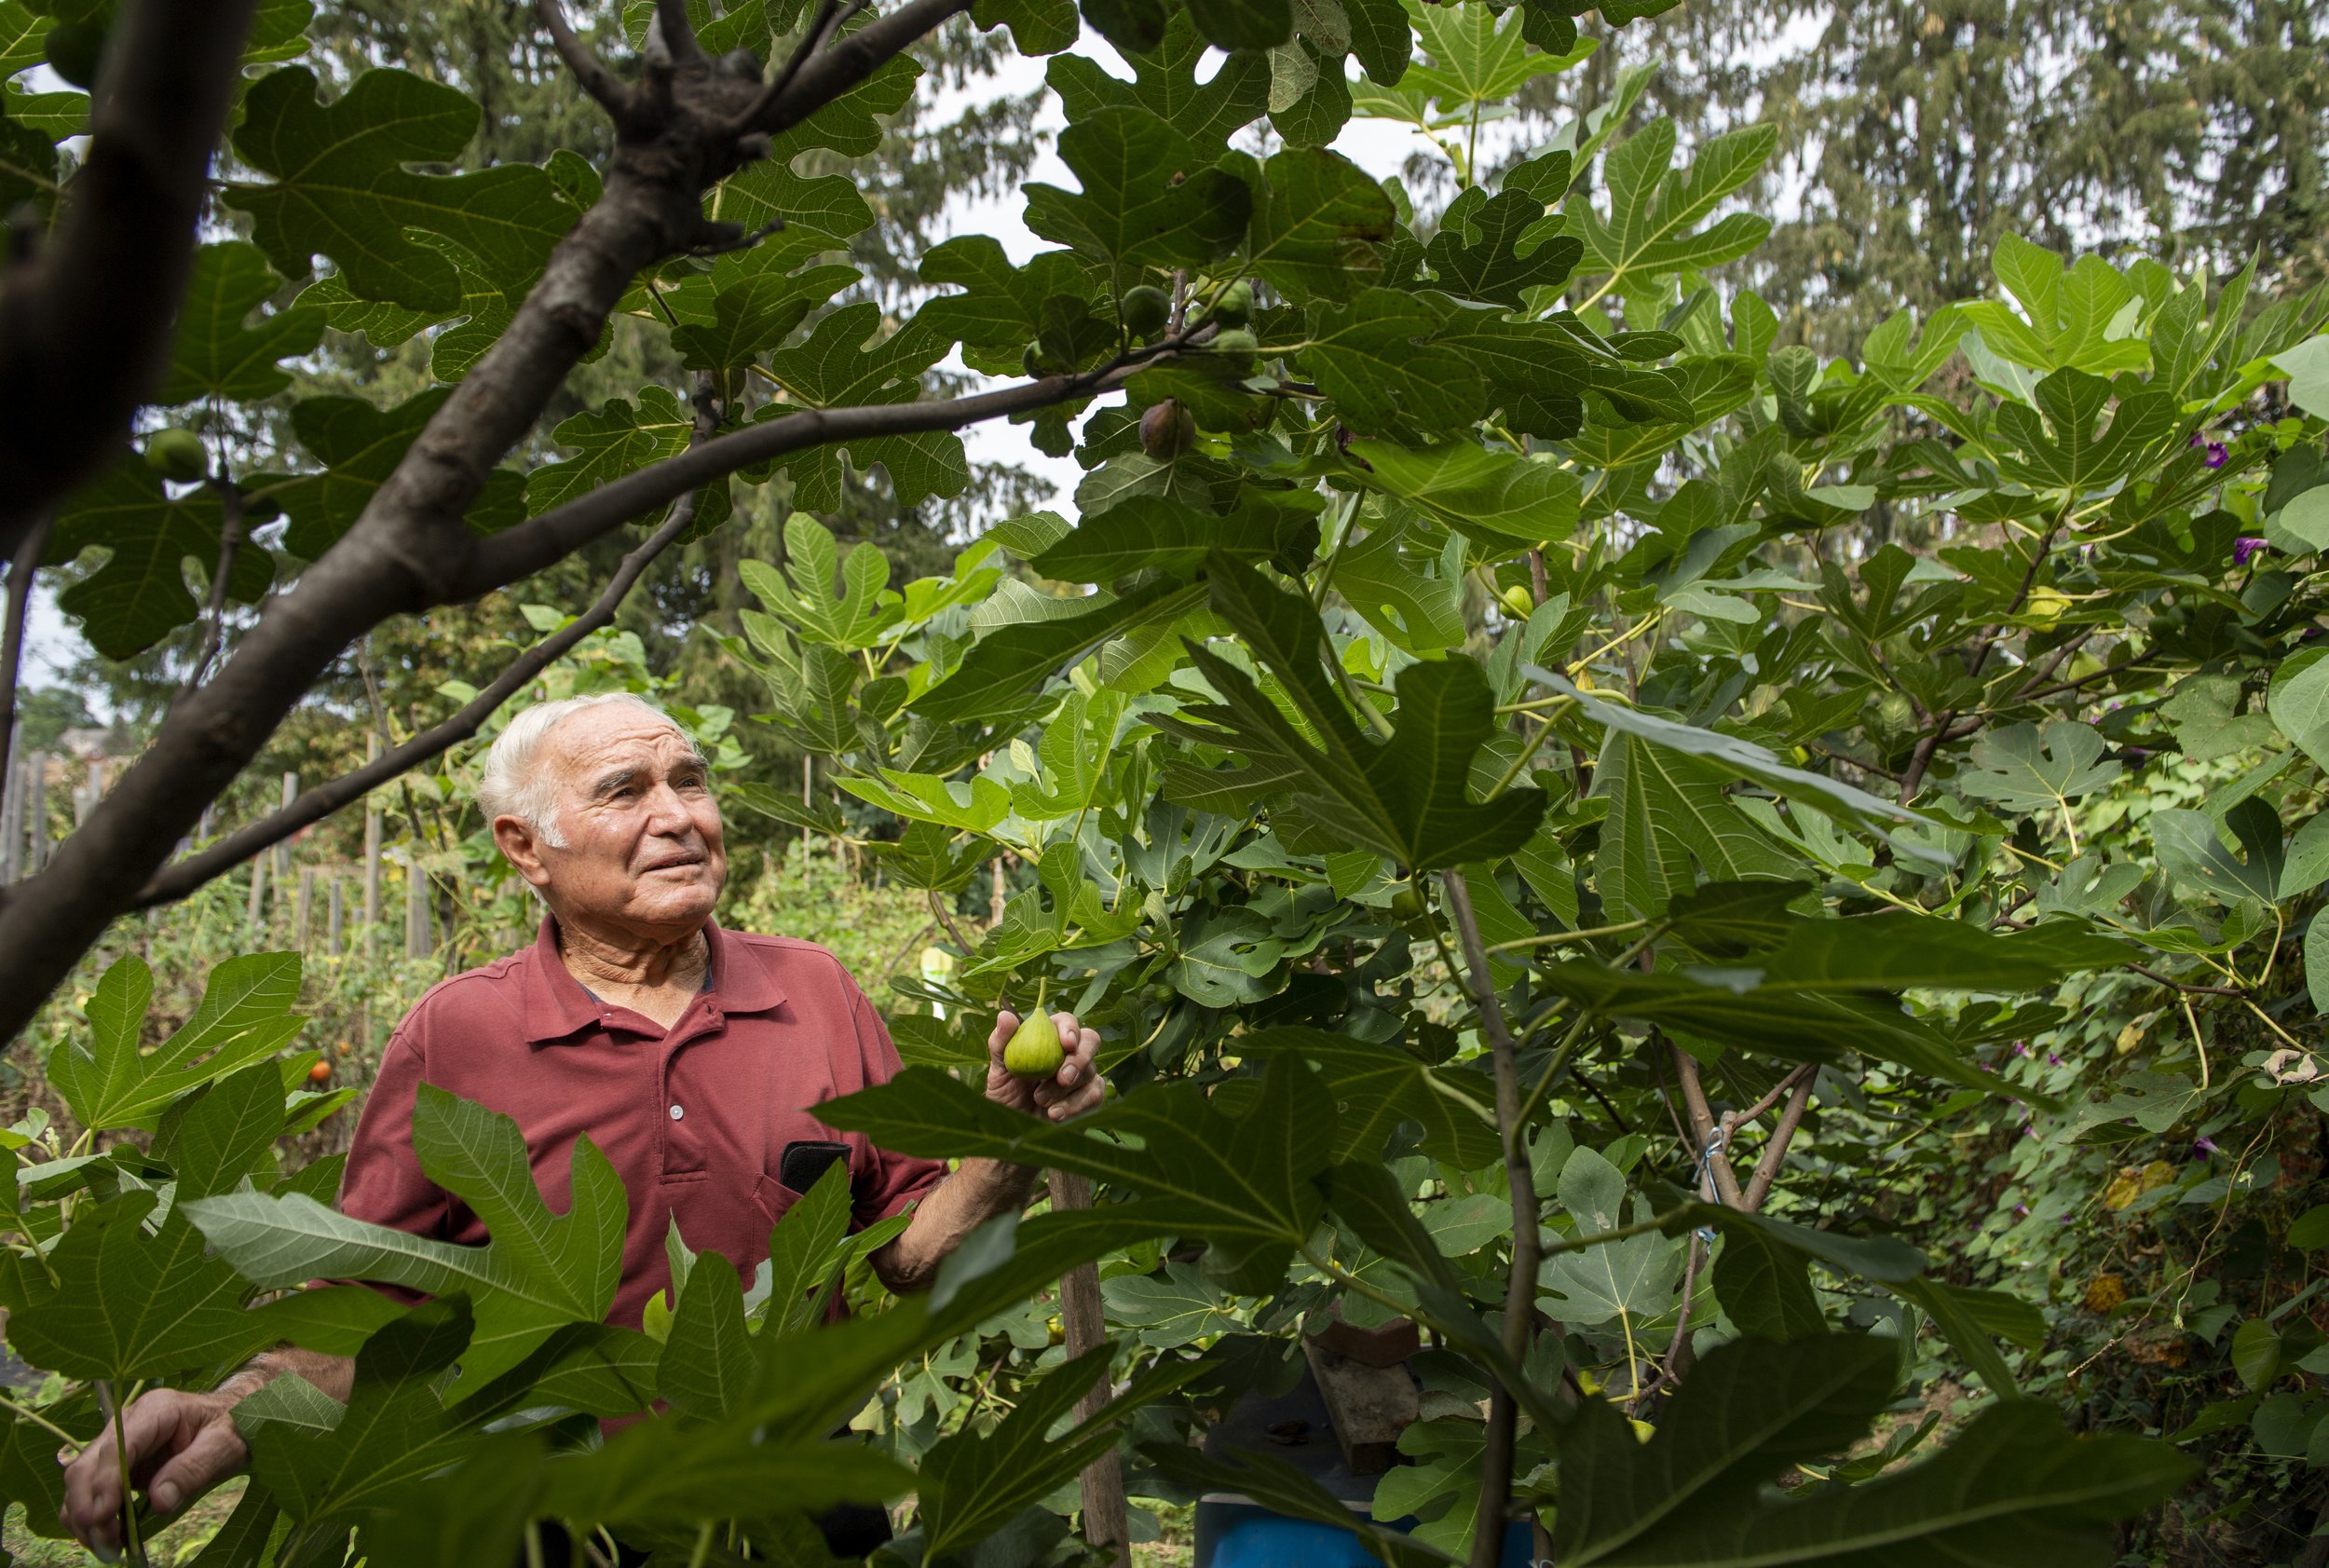  Nicola Mercurio looks at one of his fig trees in his garden on Tuesday, September 21, 2021, behind his home in Bethel Park, Pa. Mercurio is part of the Italian Garden Project, which uses Italian food and gardening traditions in Western Pennsylvania.